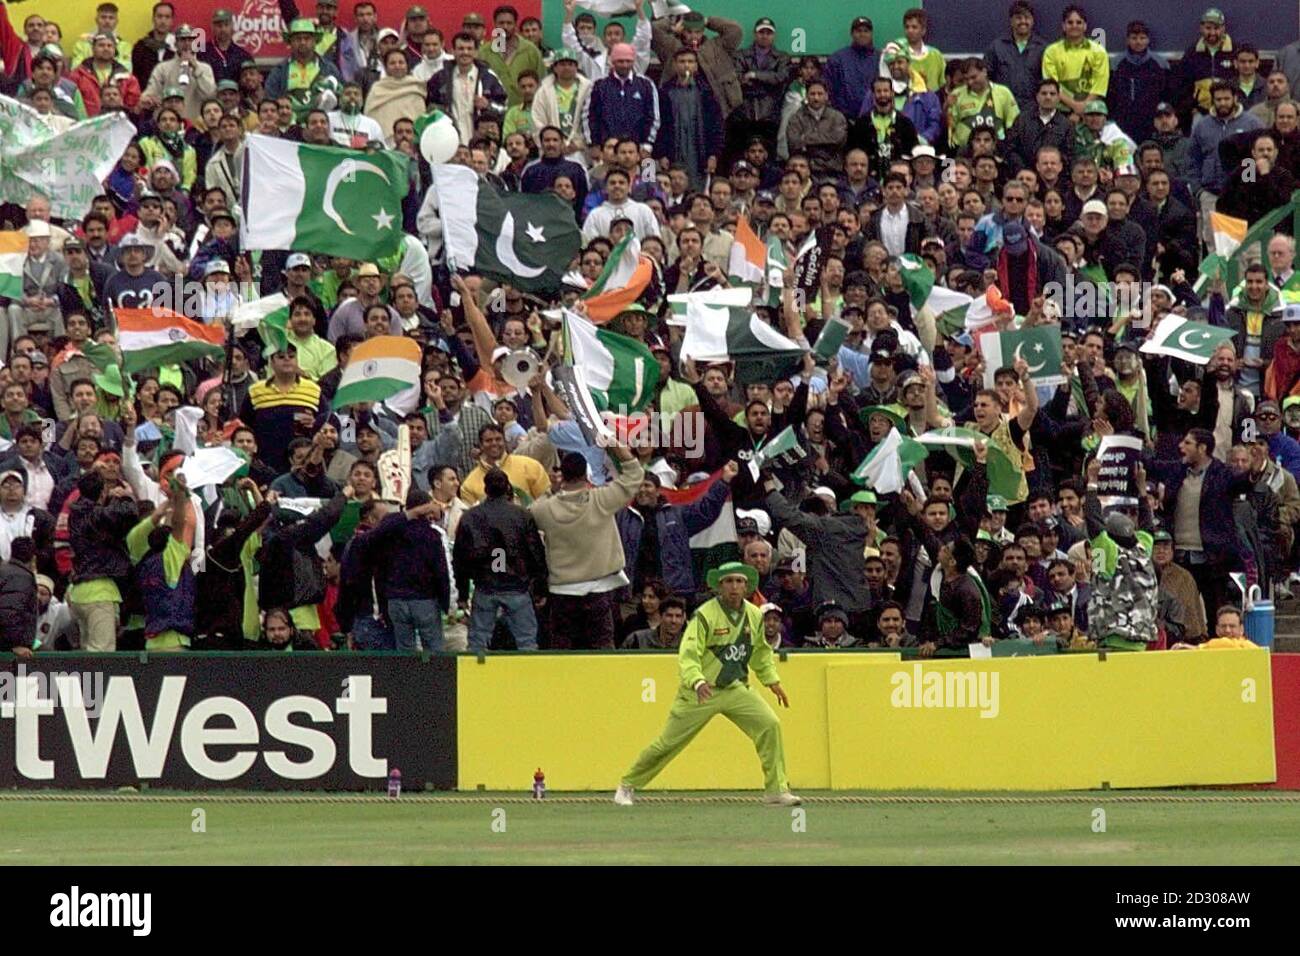 Pakistani fielder Azhar Mahmood fields in front of animated supporters during Super Six Cricket World Cup match between India and Pakistan at Old Trafford, Manchester.  Stock Photo